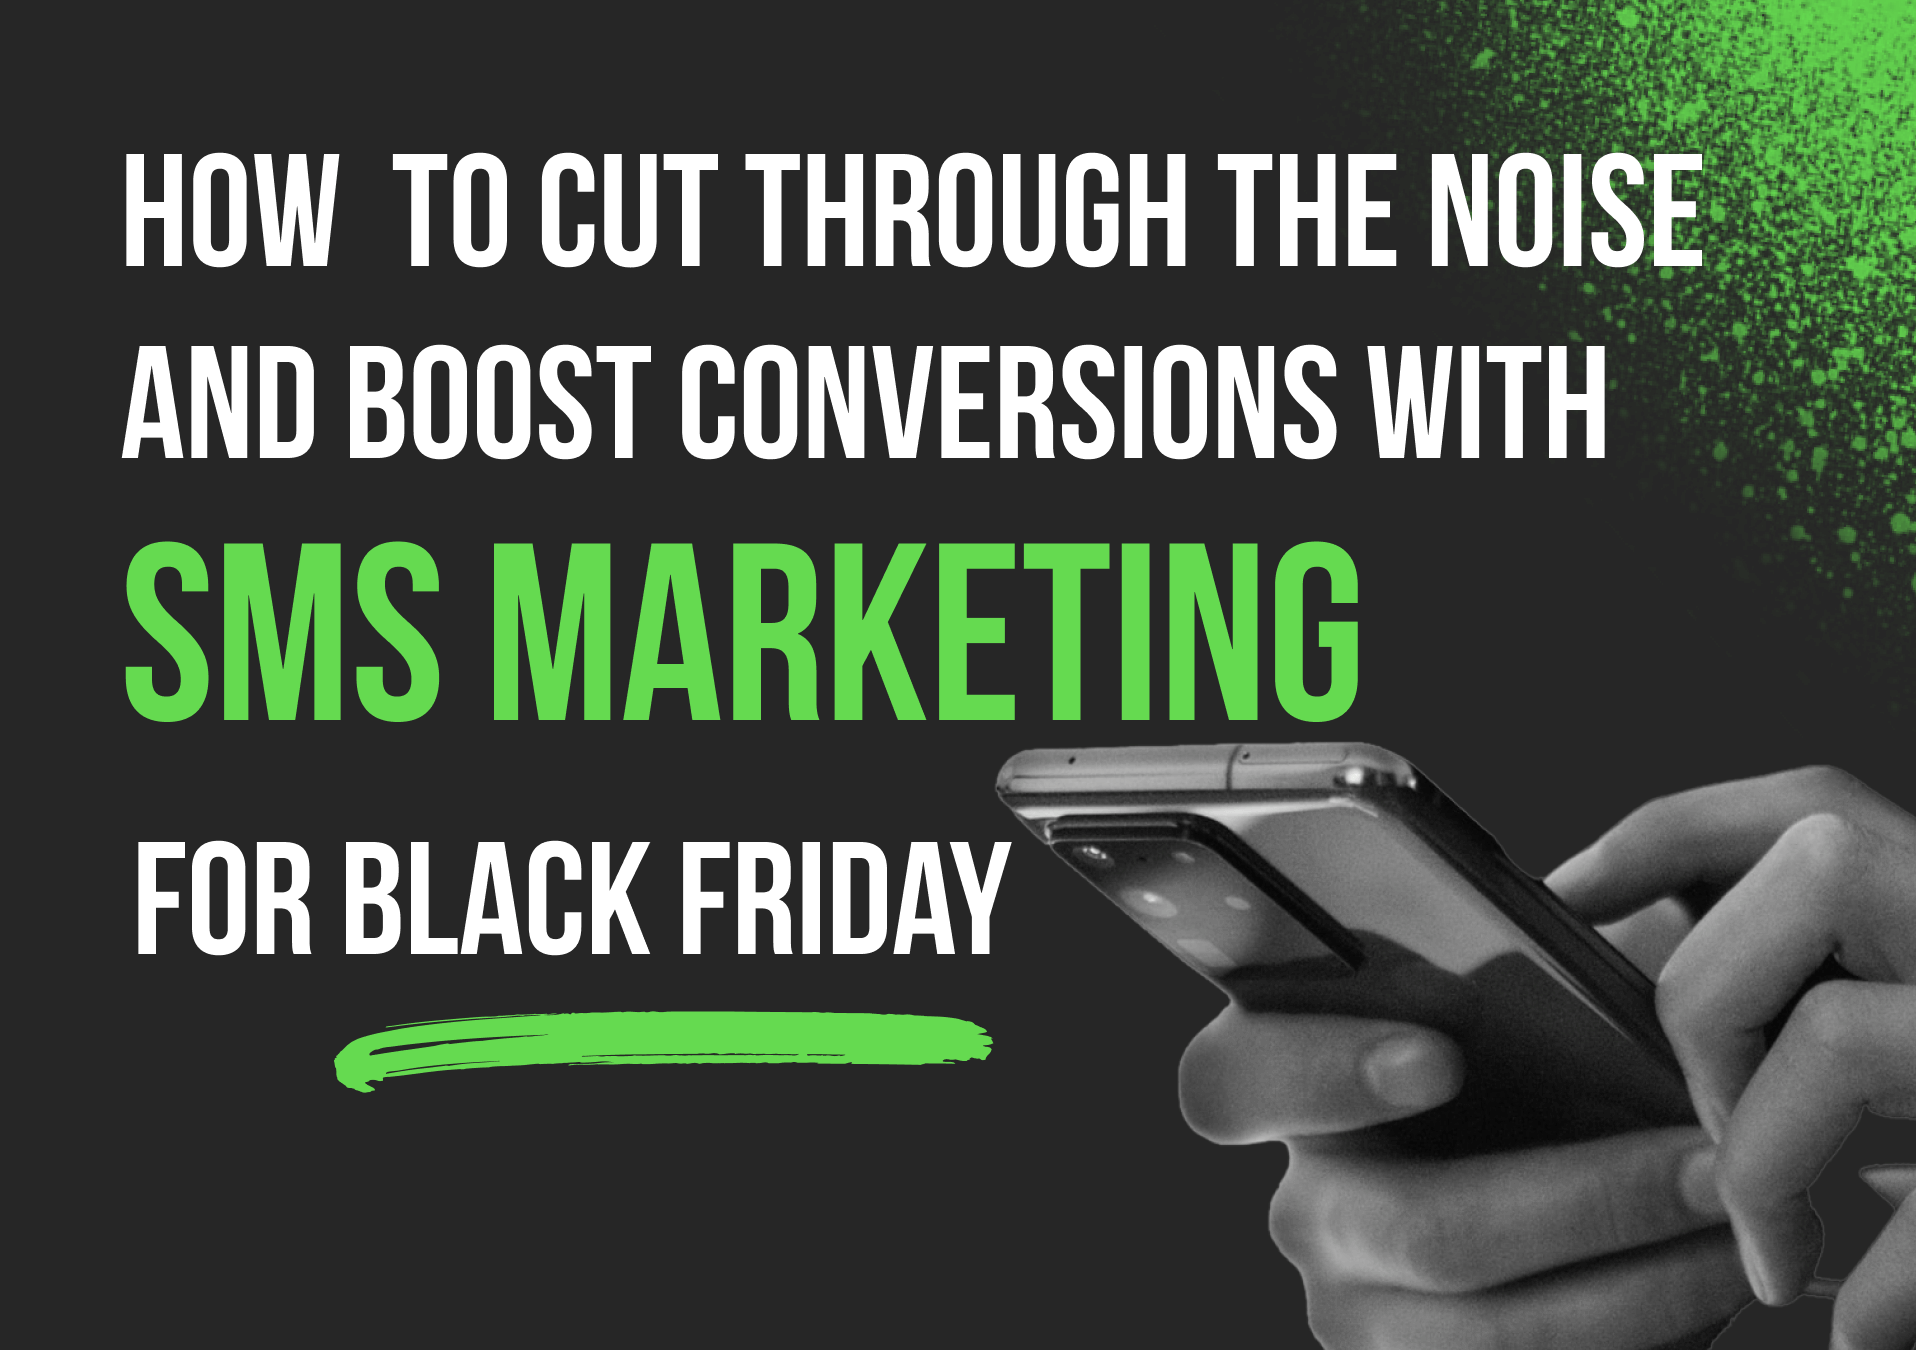 How to Cut Through the Noise and Boost Conversions With SMS Marketing for Black Friday (BFCM Series Part 3)